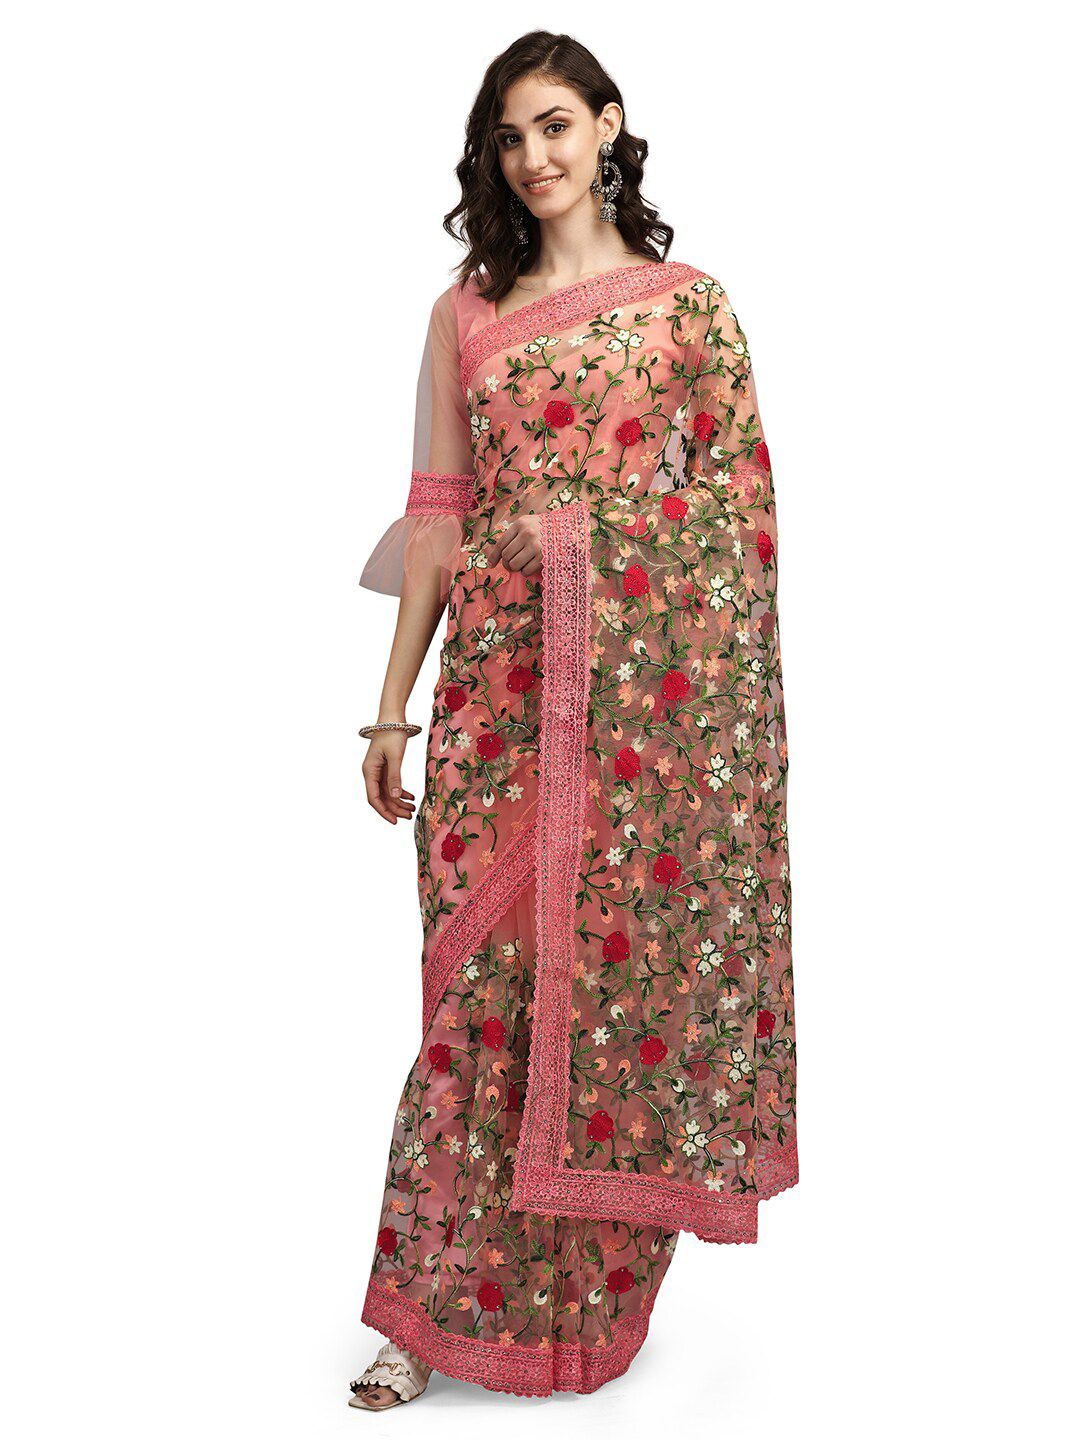 Pisara Peach-Coloured & Red Embellished Net Saree Price in India